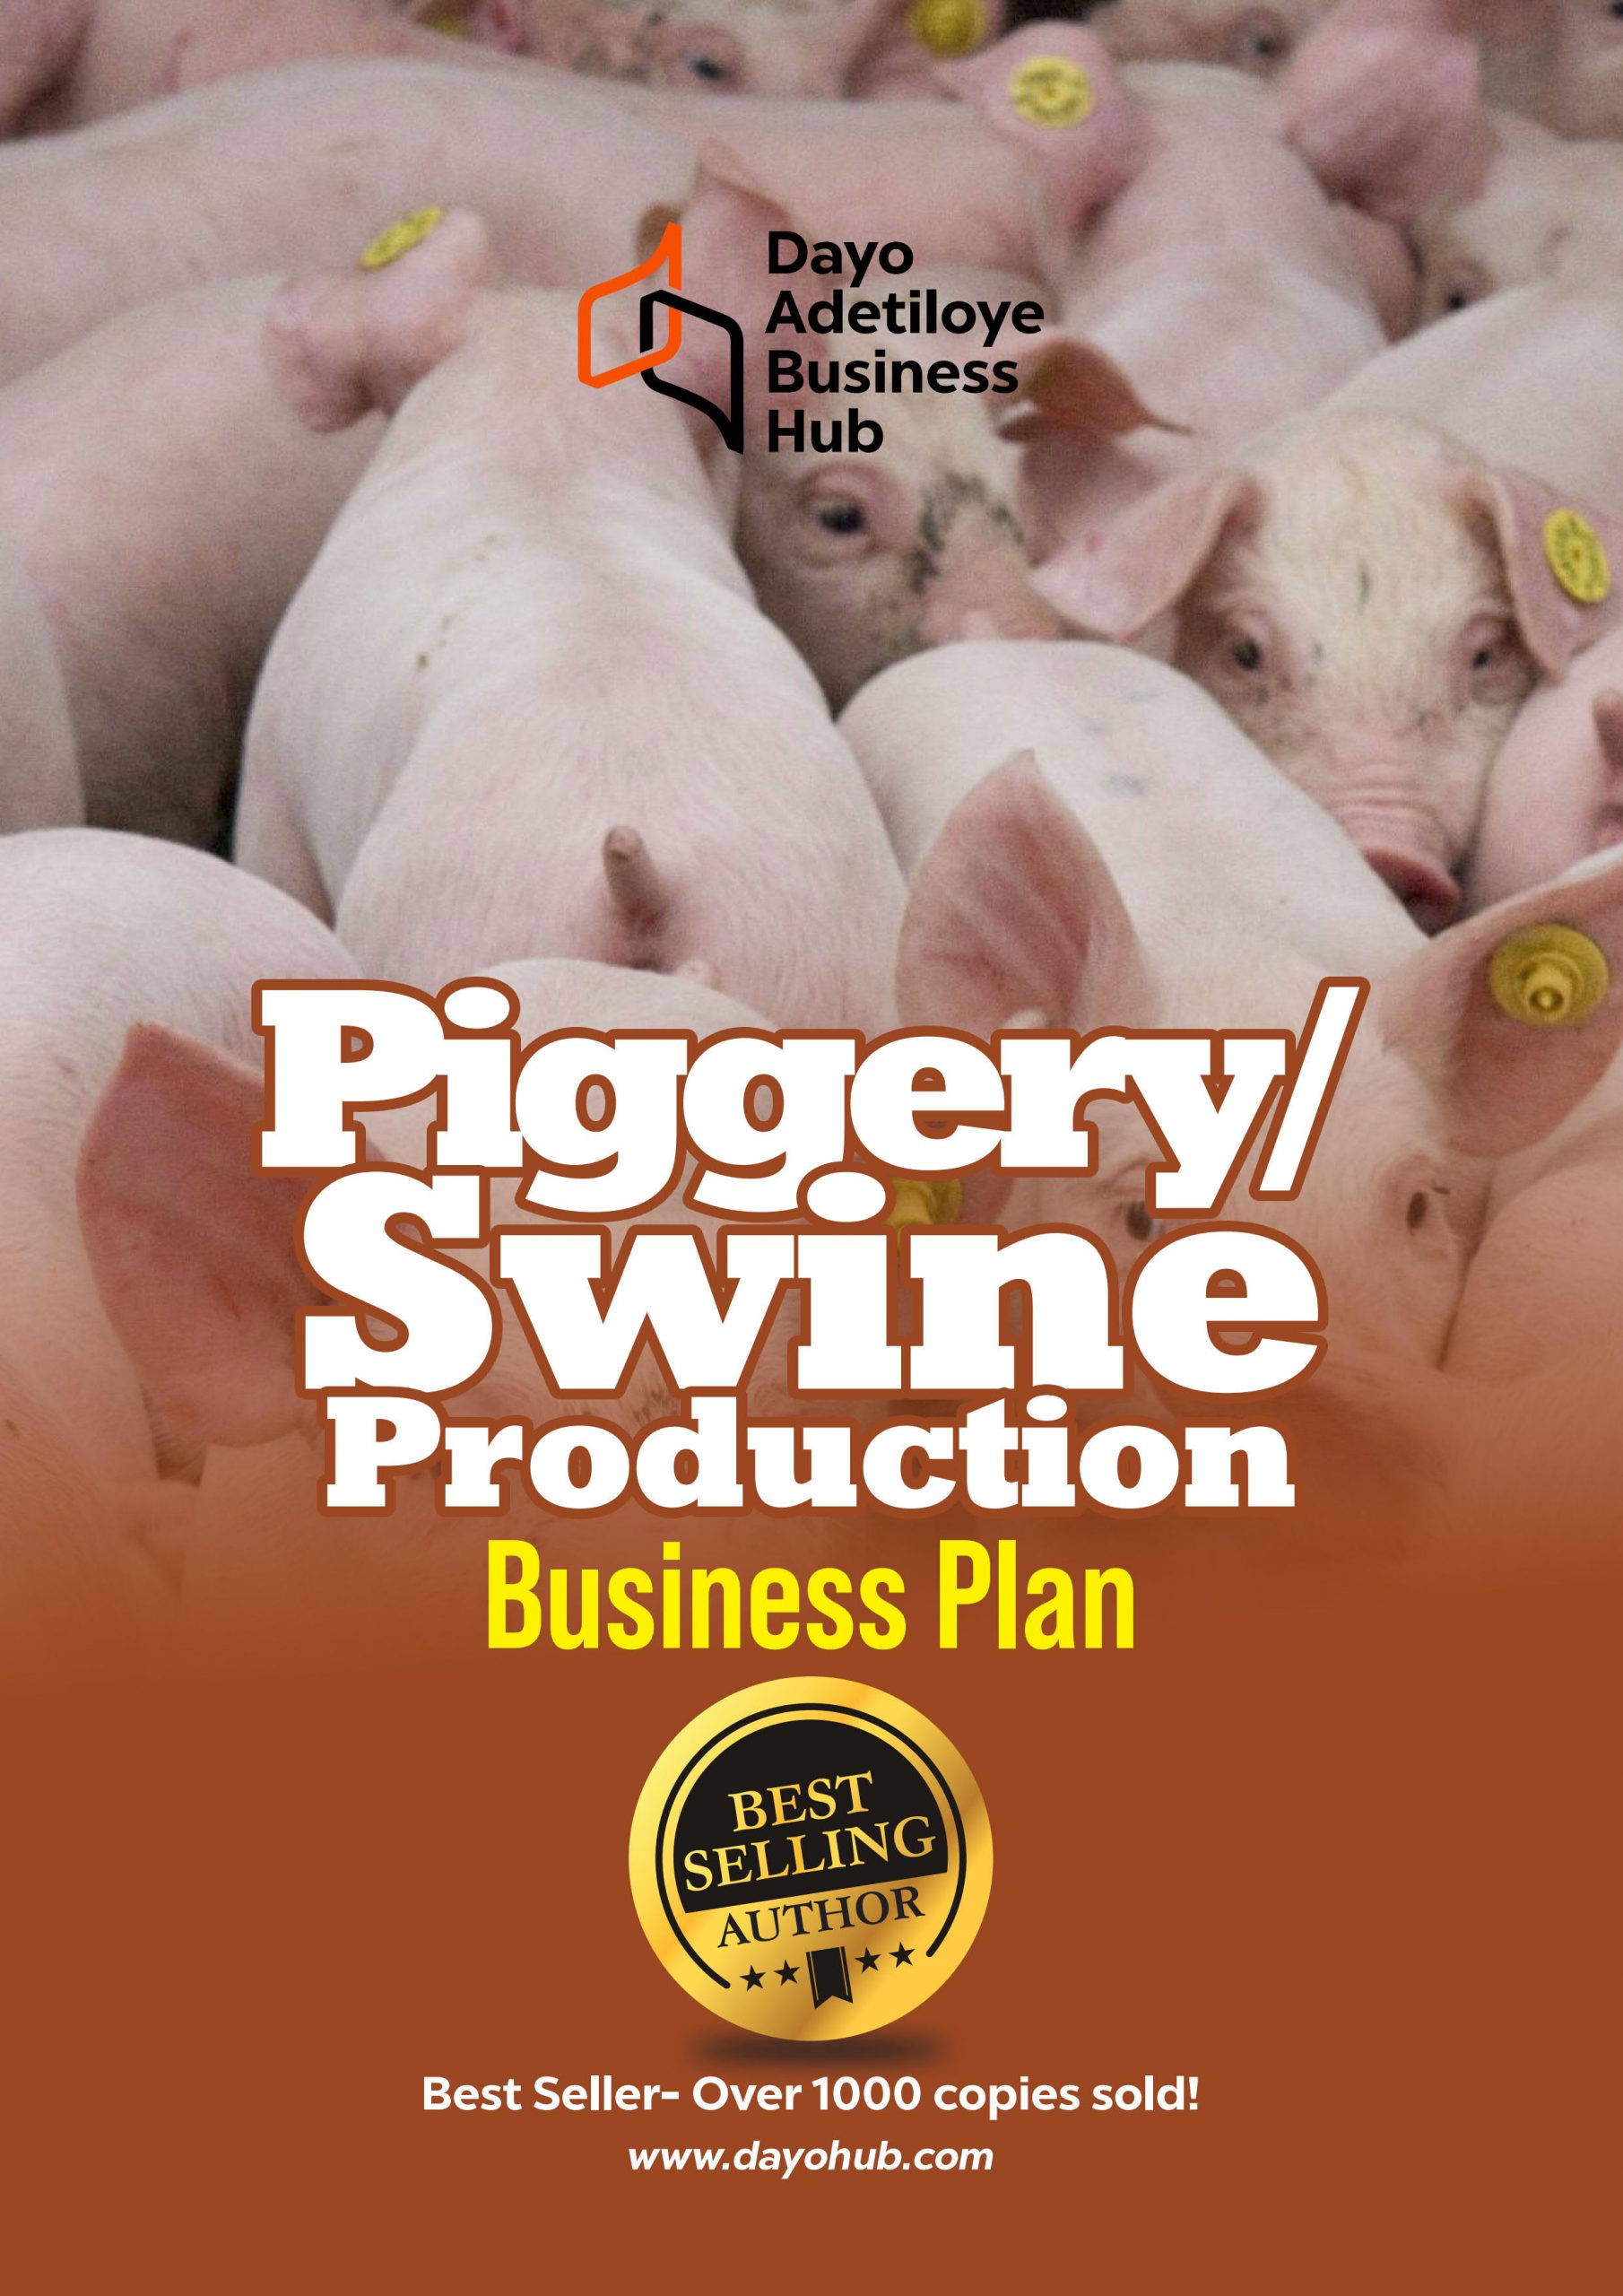 examples of piggery business plan